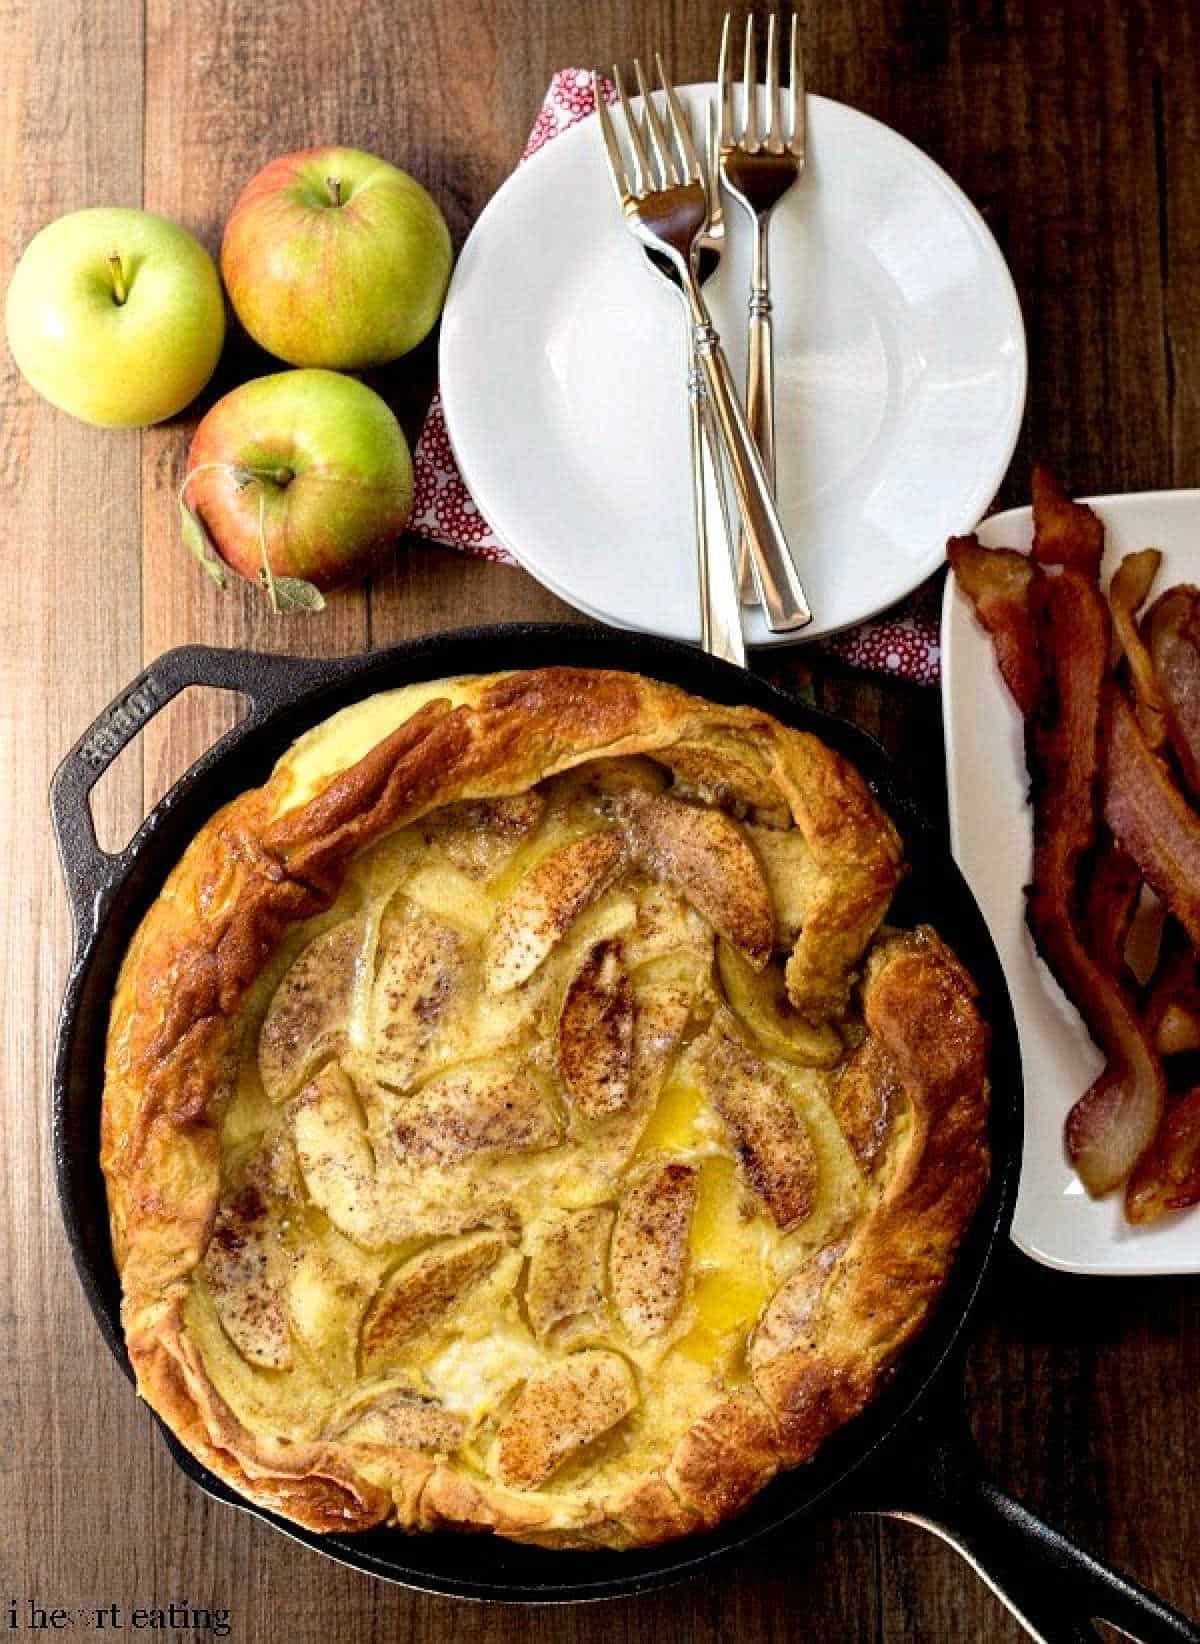 Caramelized apple German pancake next to apples and a plate of bacon.